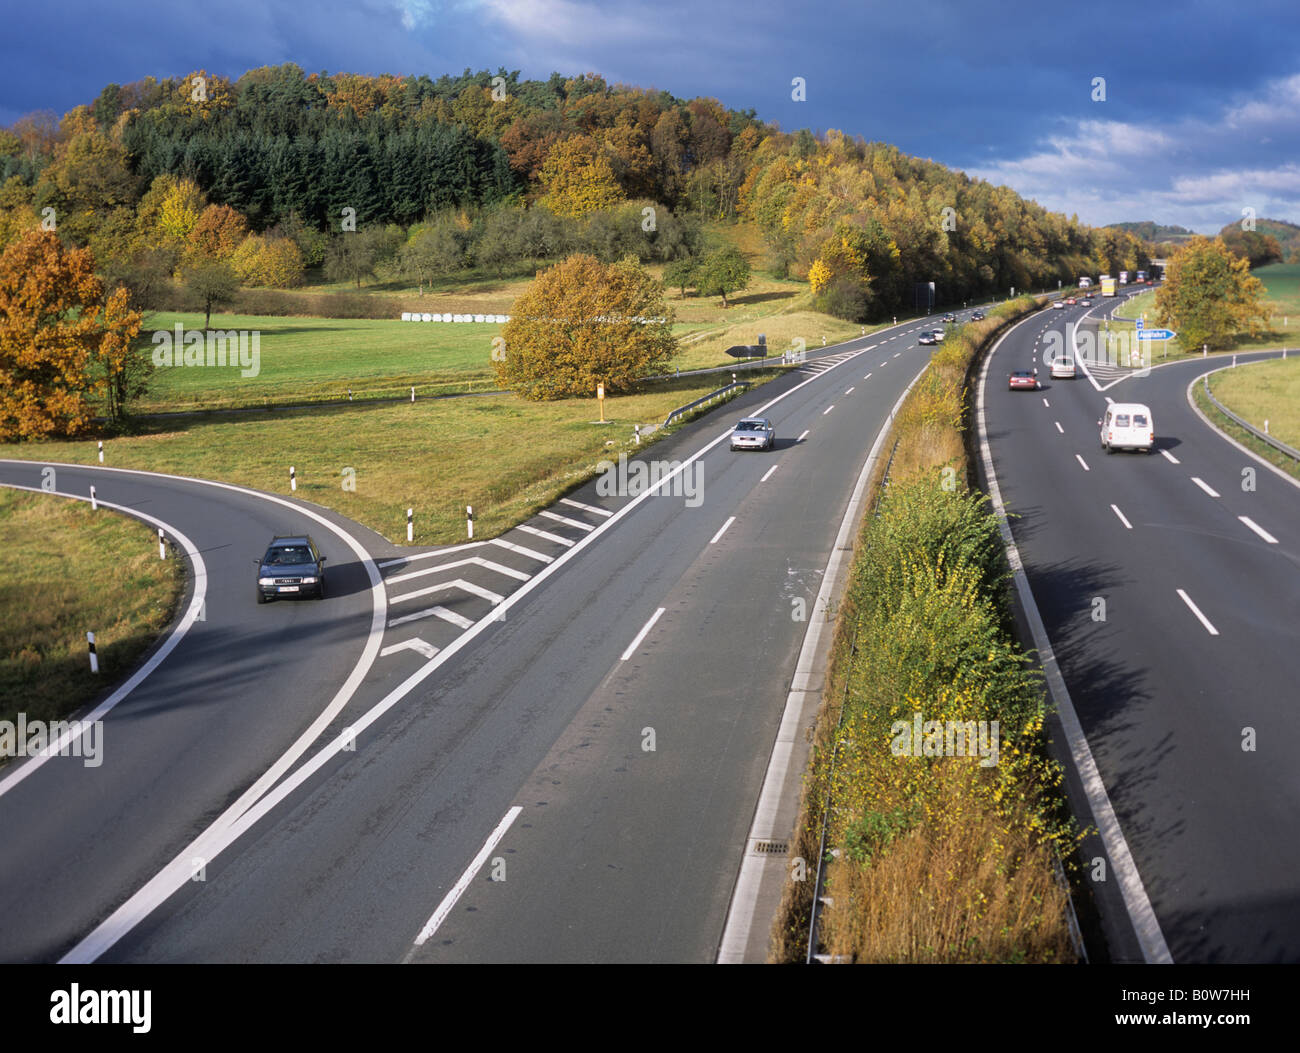 View onto the autobahn, motorway in Germany Stock Photo